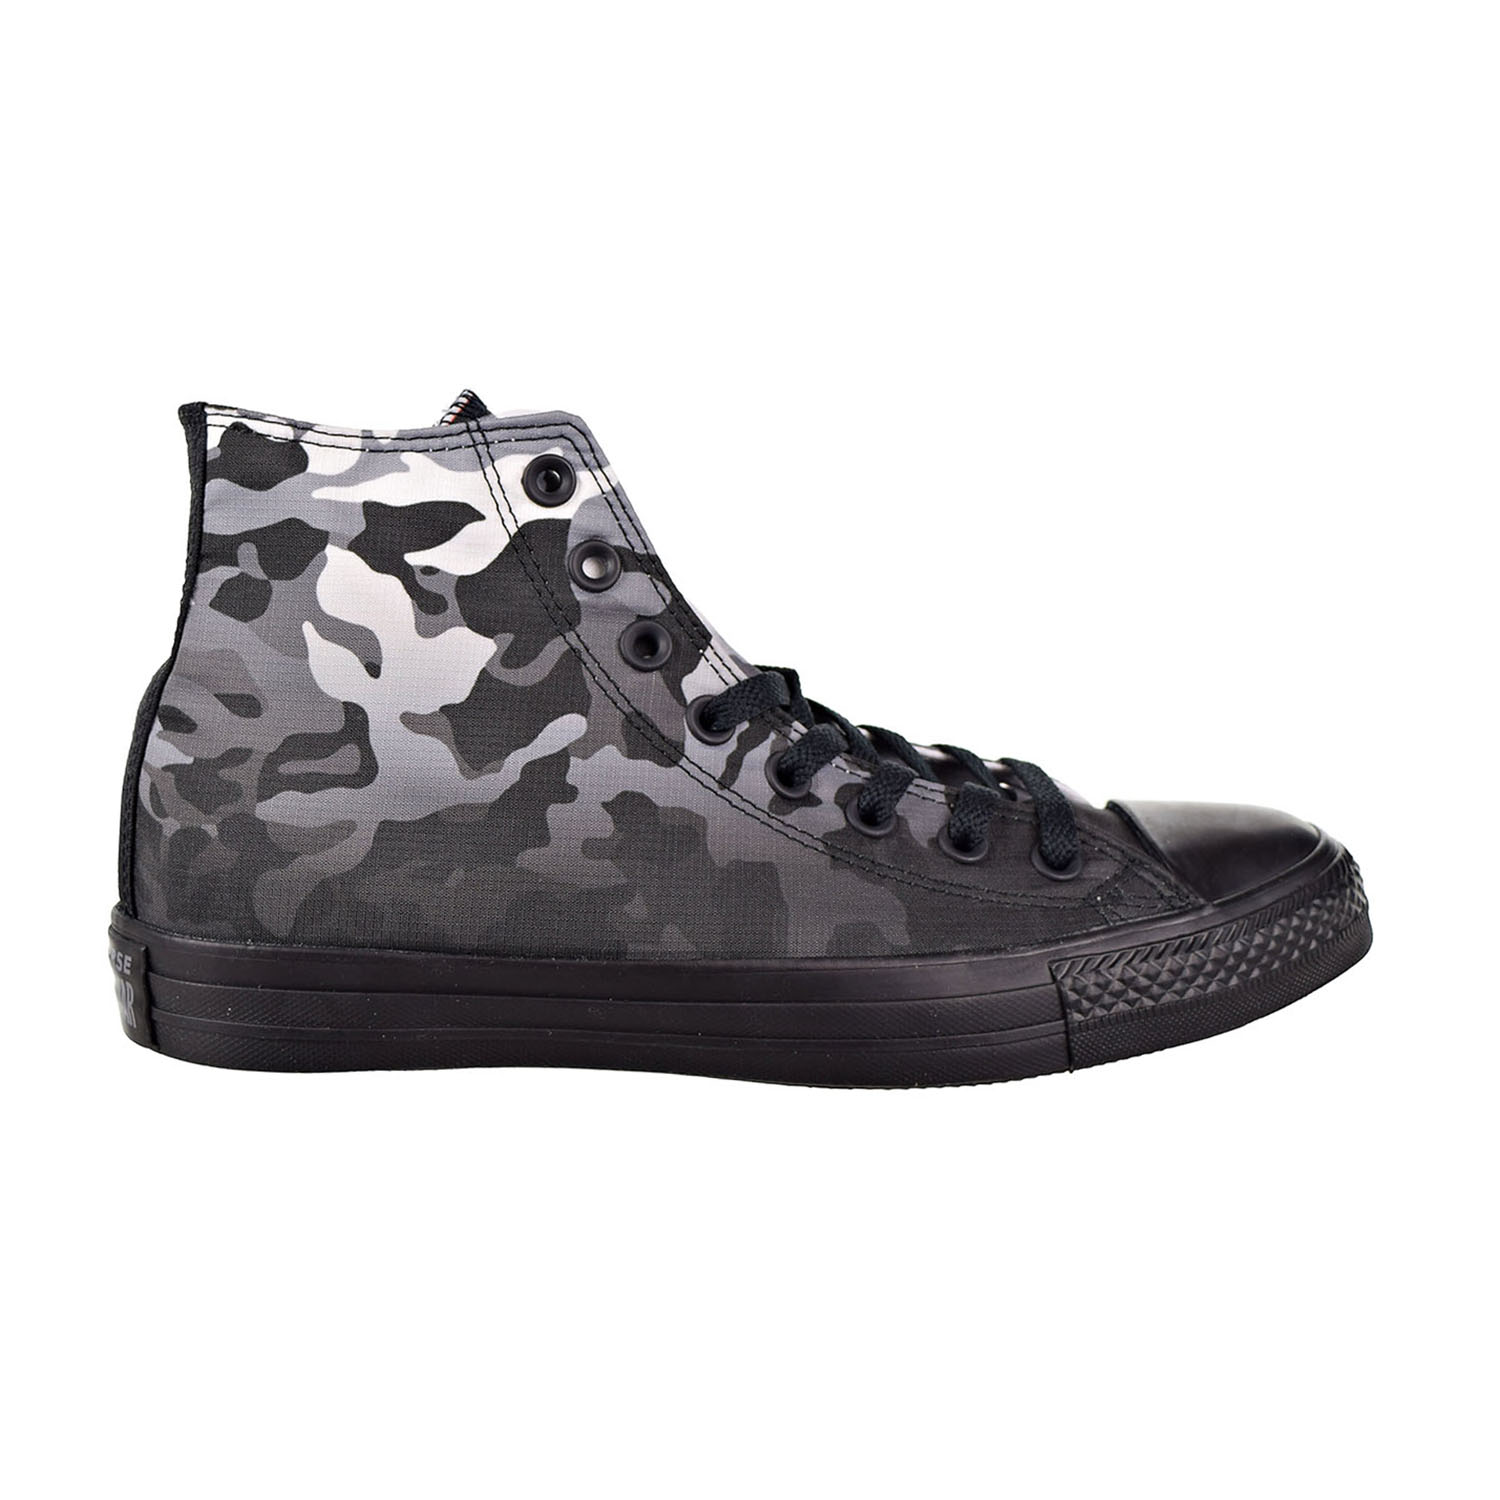 Converse All Star Camouflage Online 